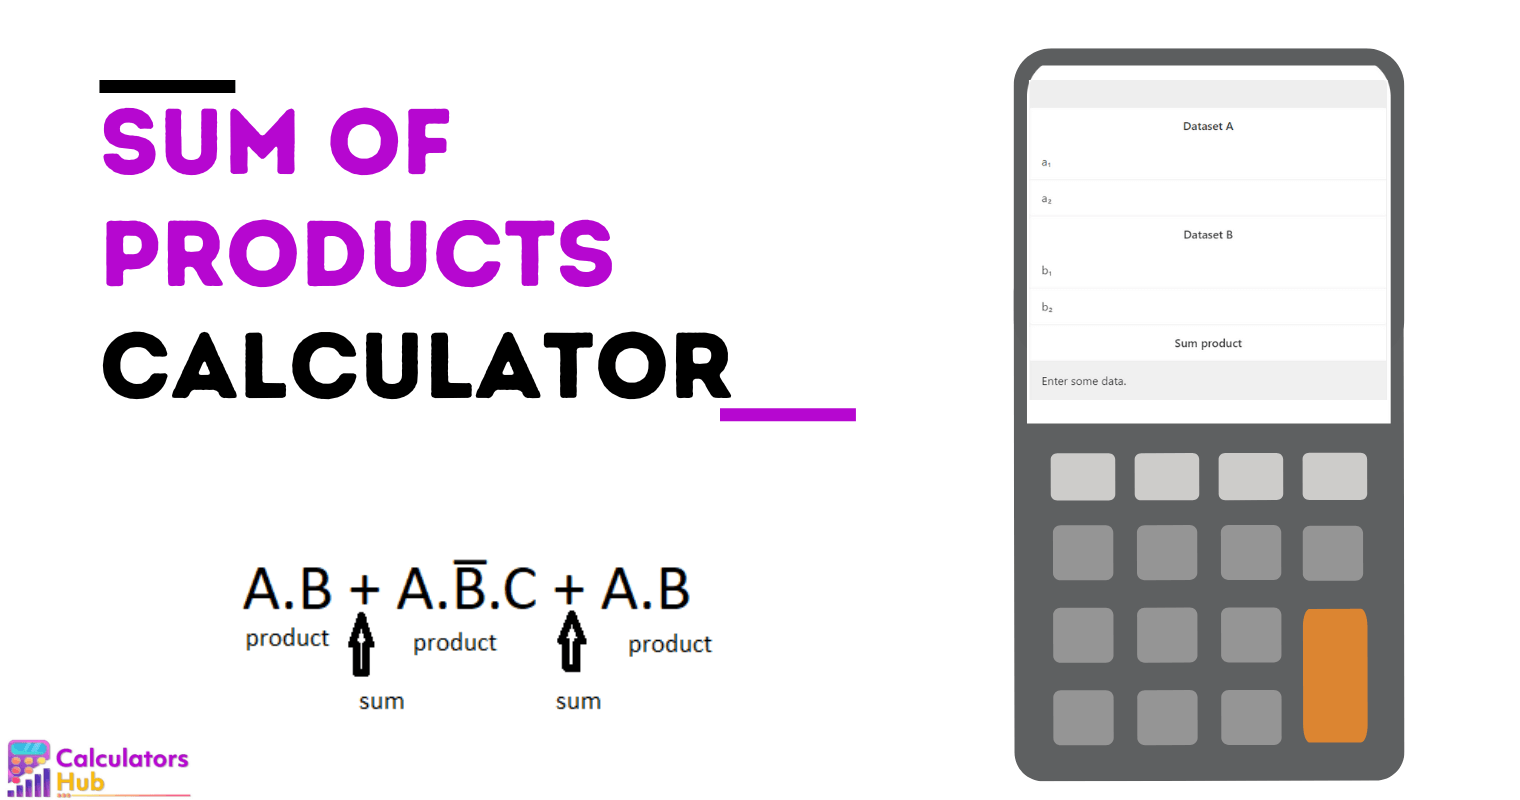 Sum of Products Calculator